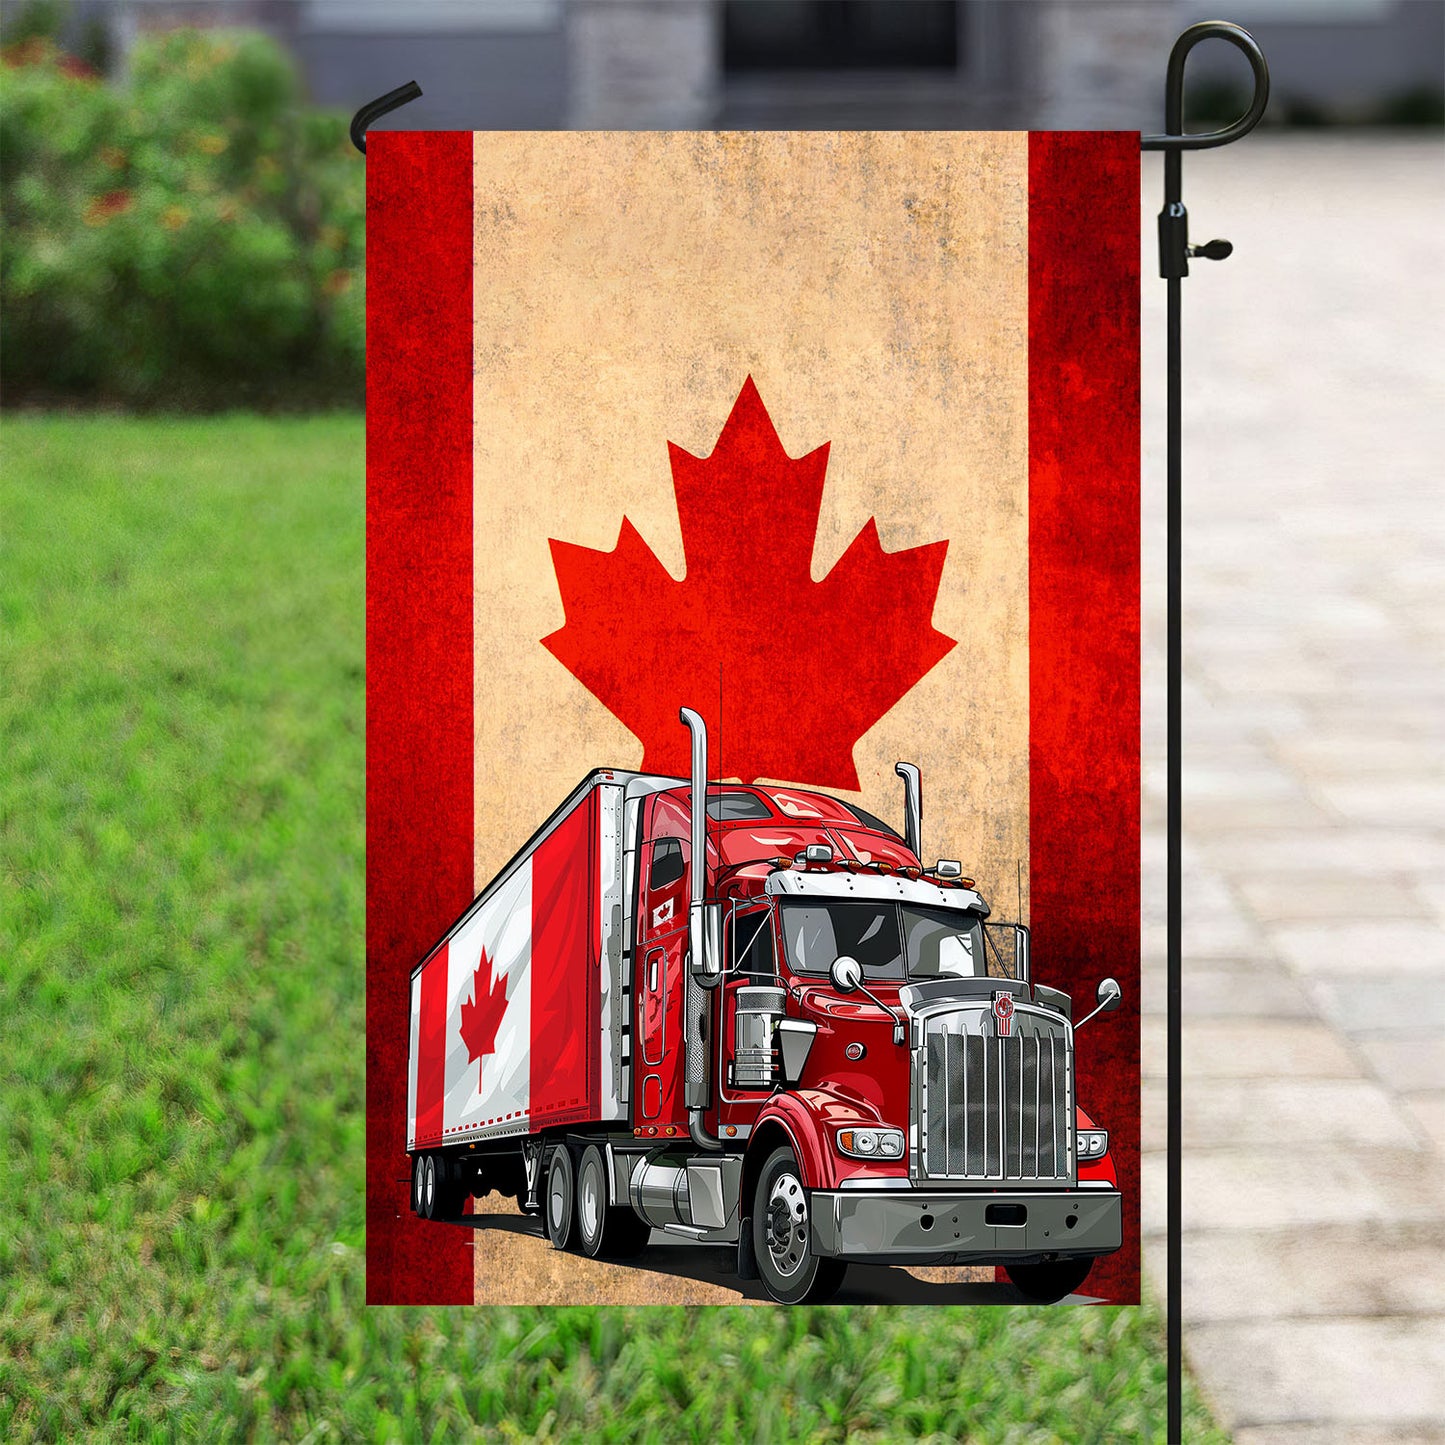 July 4th Trucker Garden Flag - House Flag, Canada's Transport Trail, Independence Day Yard Flag Gift Trucker Lovers